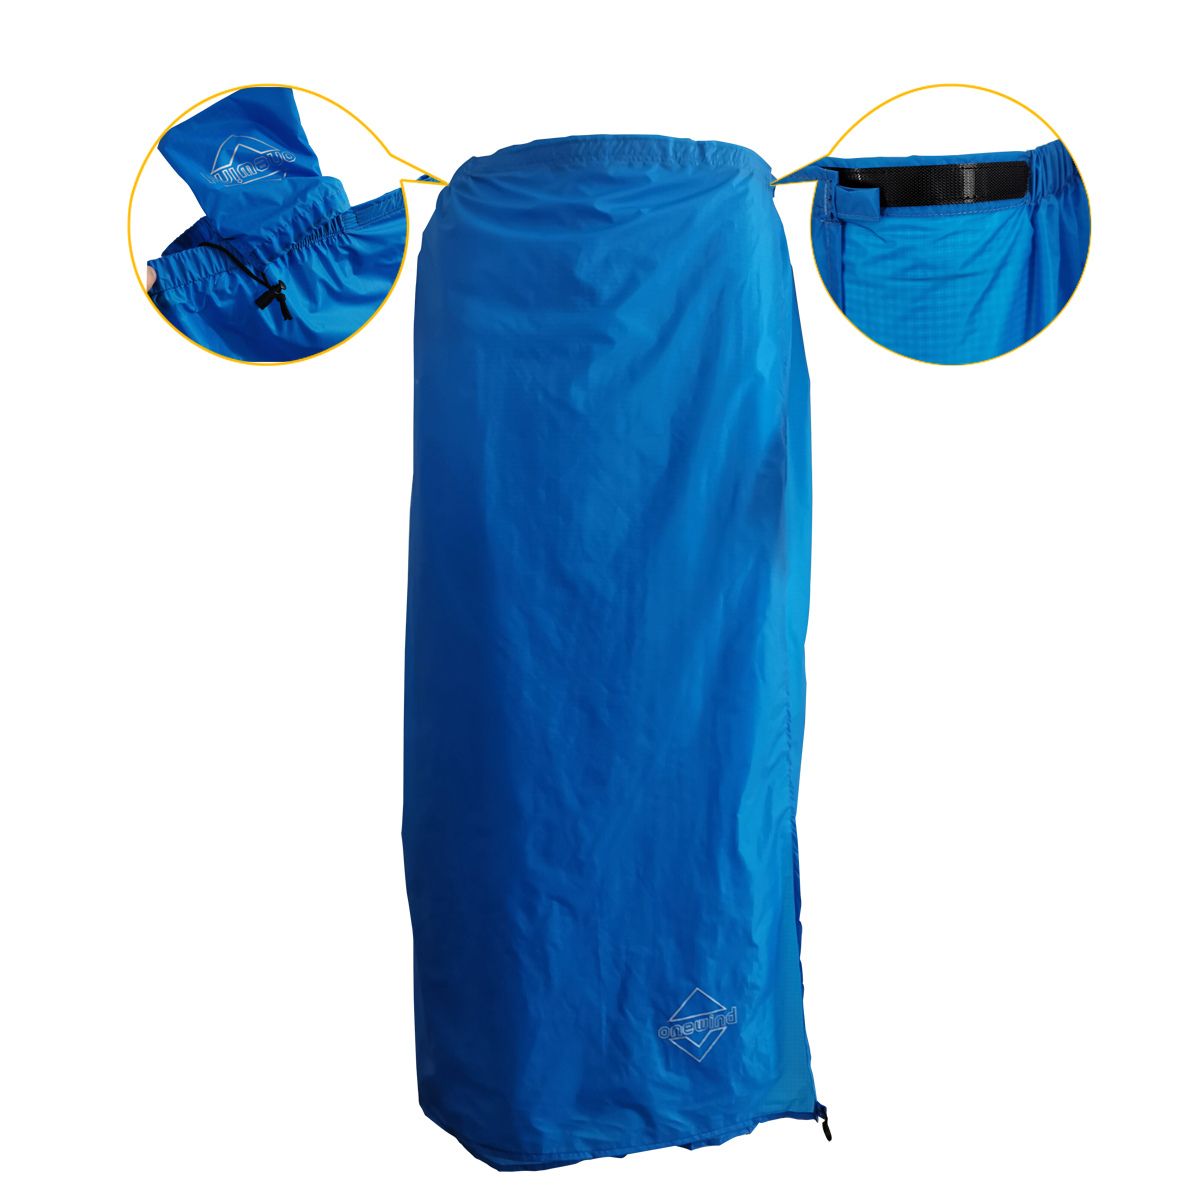 Rain Jacket with Side Zippers : r/CampingGear